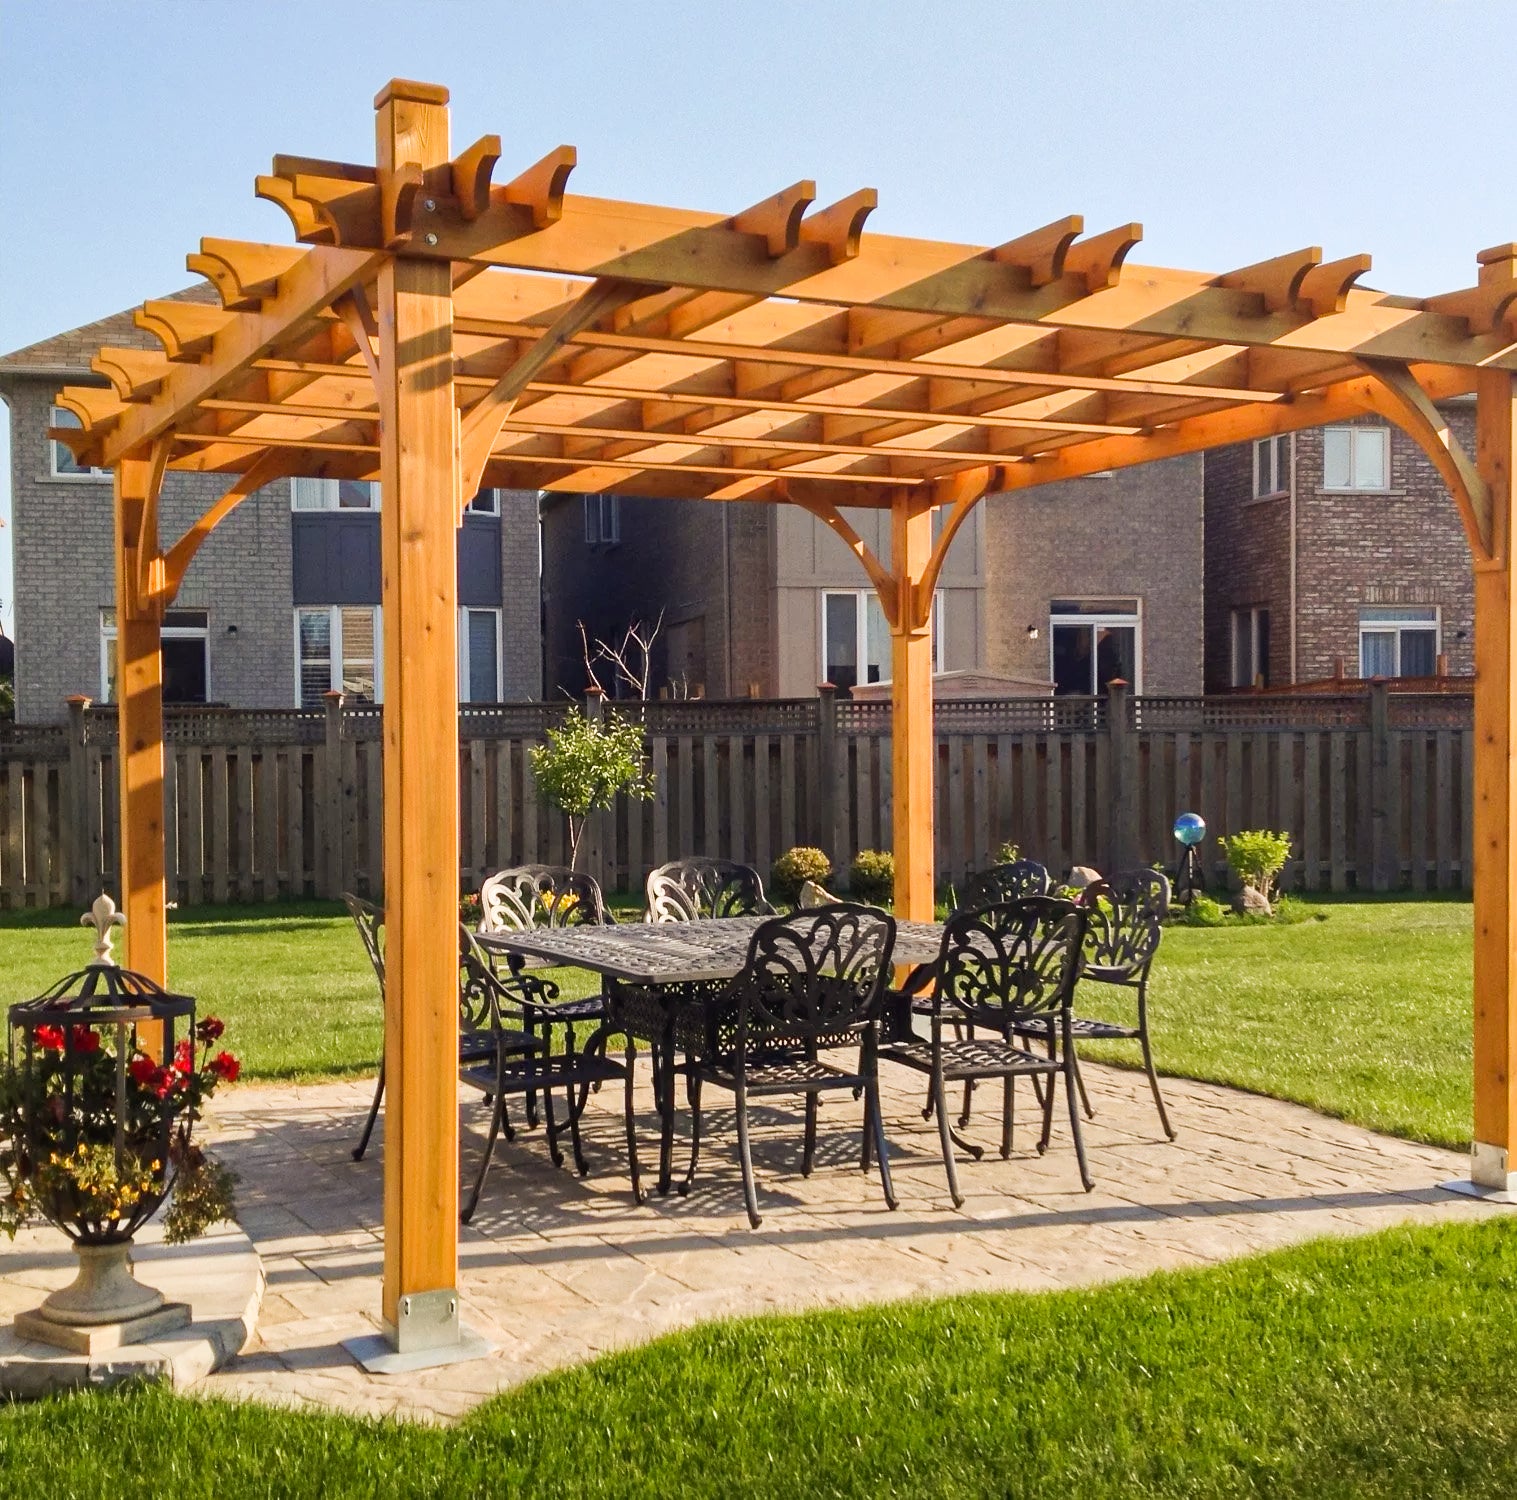 Outdoor Living Today Cedar Pergola with outdoor furniture on a paver